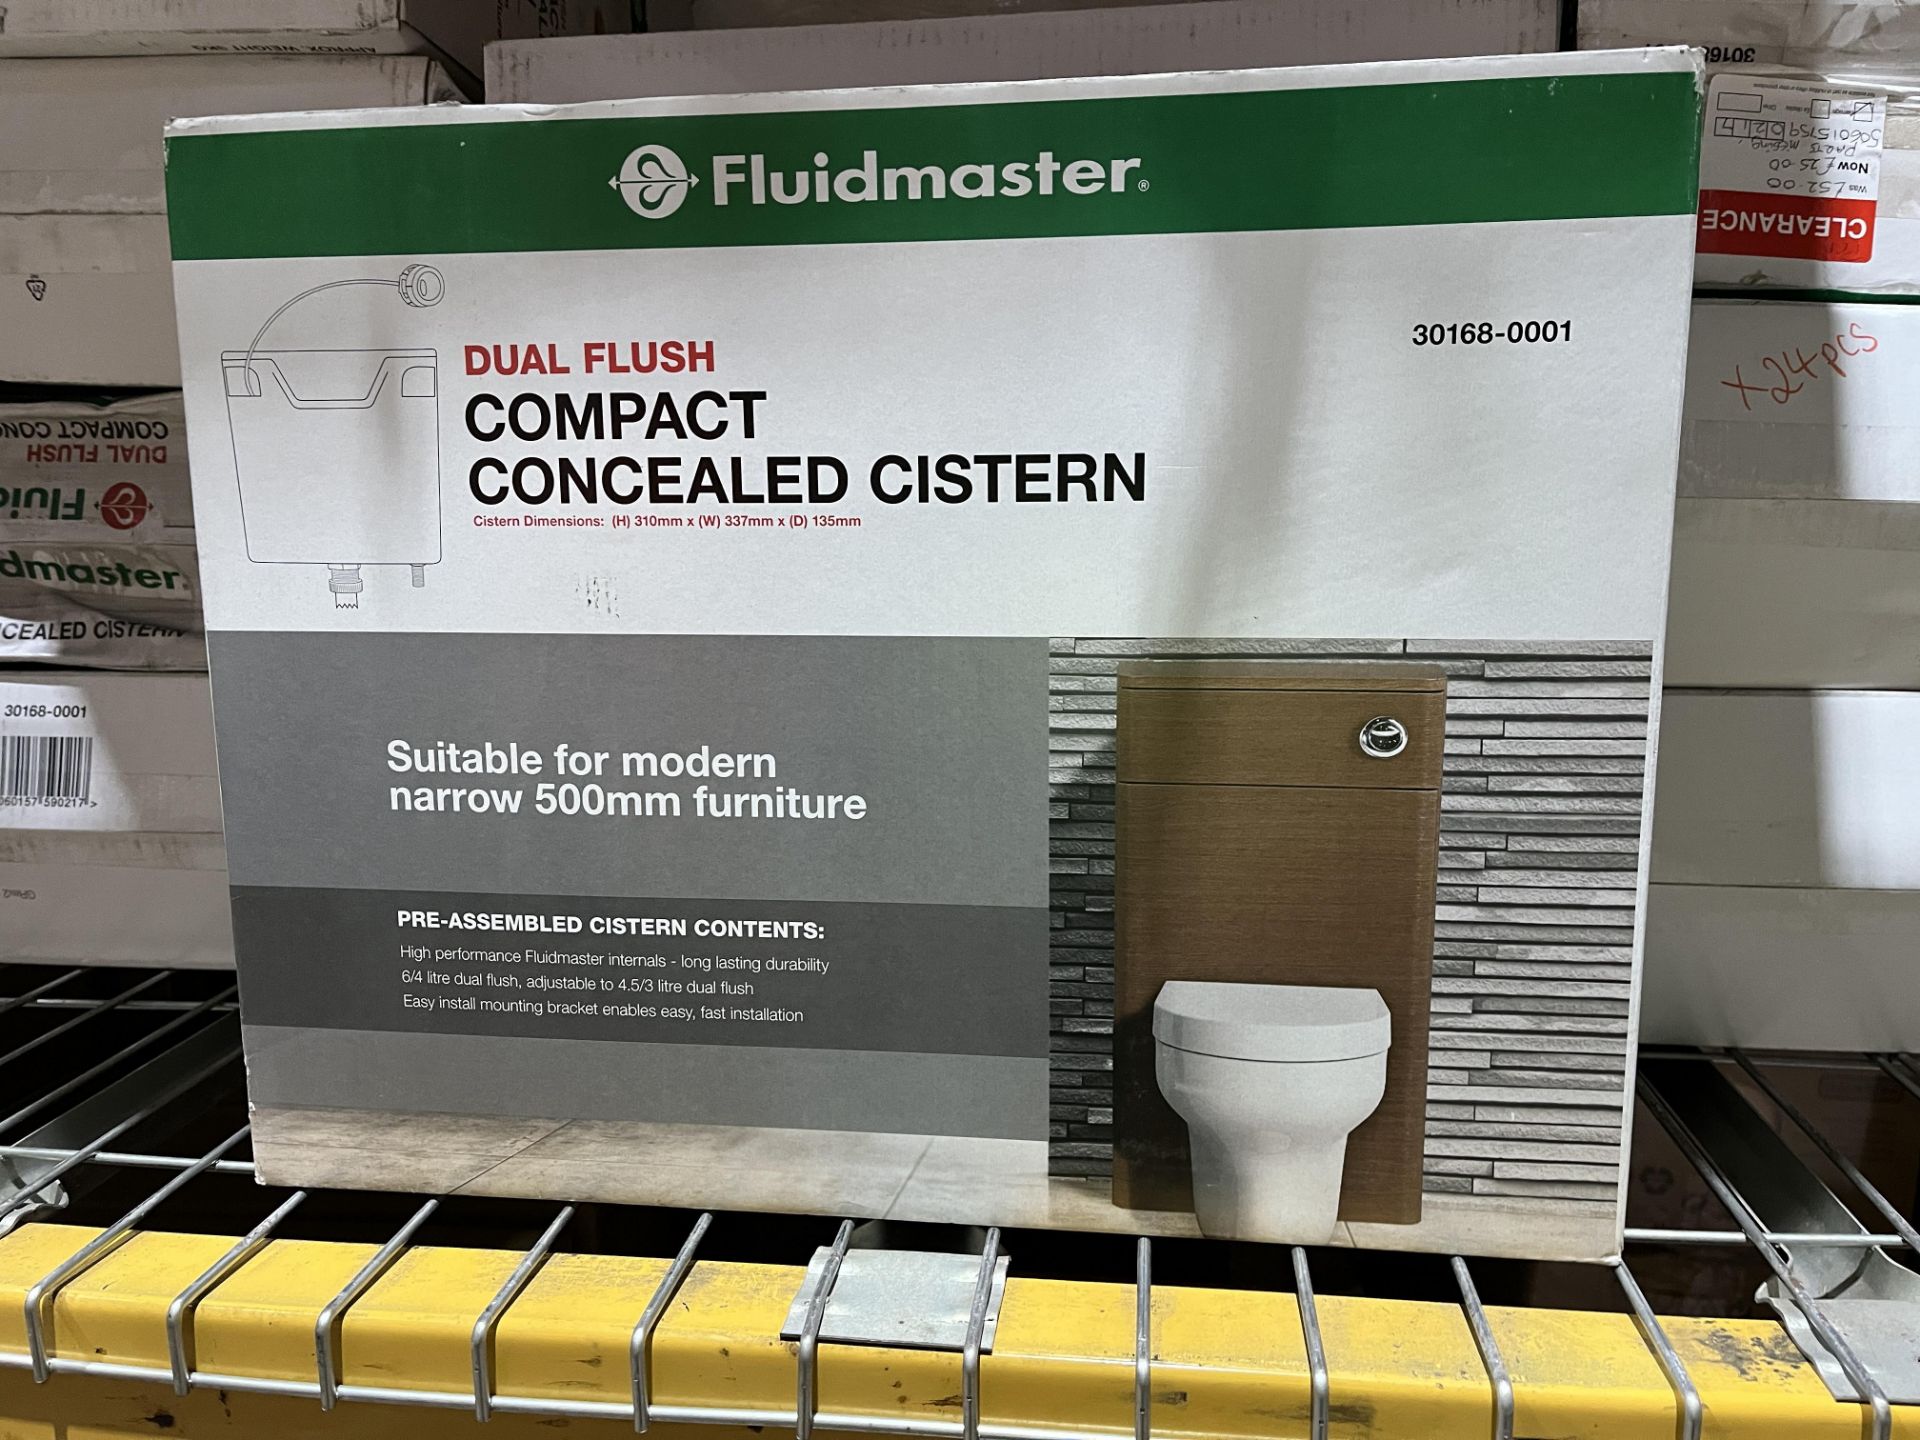 8 X BRAND NEW FLUIDMASTER DULA FLUSH COMPACT CONCEALED CISTERNS R9-4